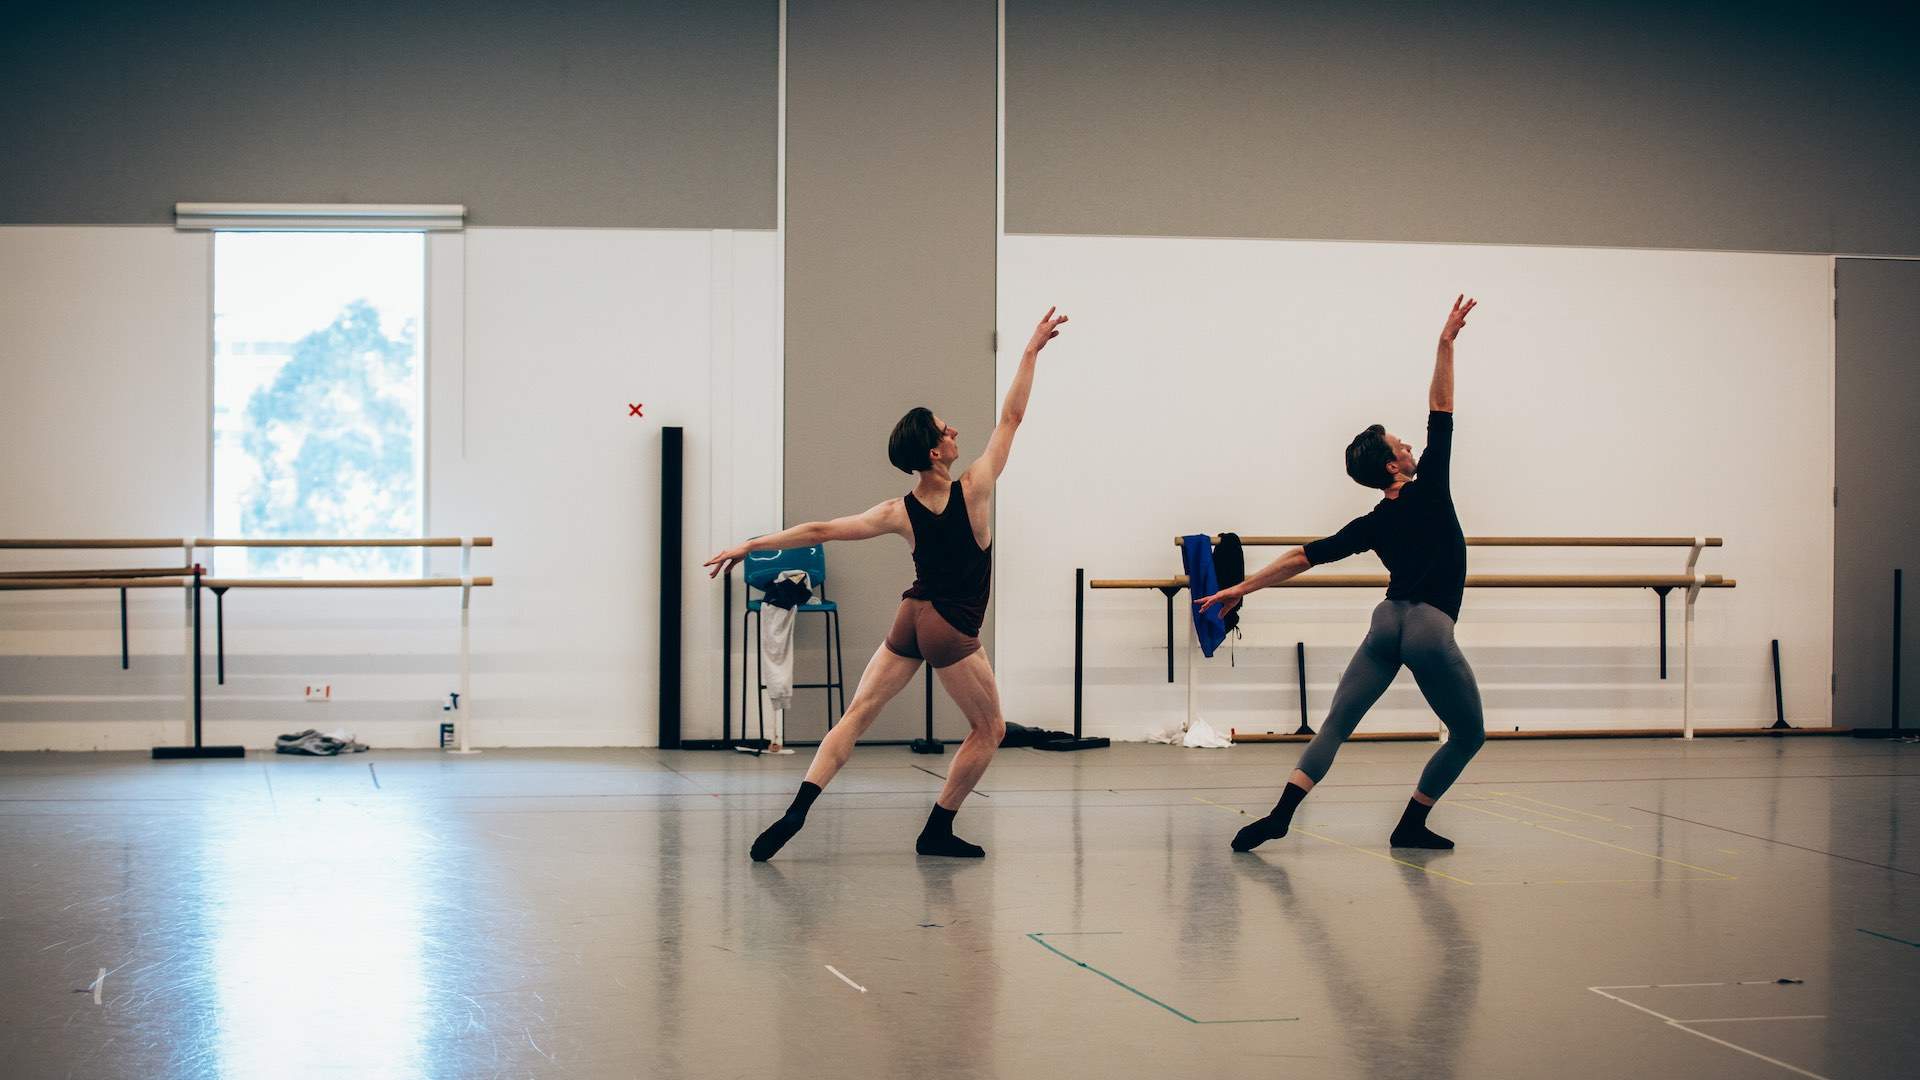 Instruments of Dance: The Australian Ballet's Drew Hedditch on Preparing to Hit the Stage With the Soon-to-Come Triple Bill